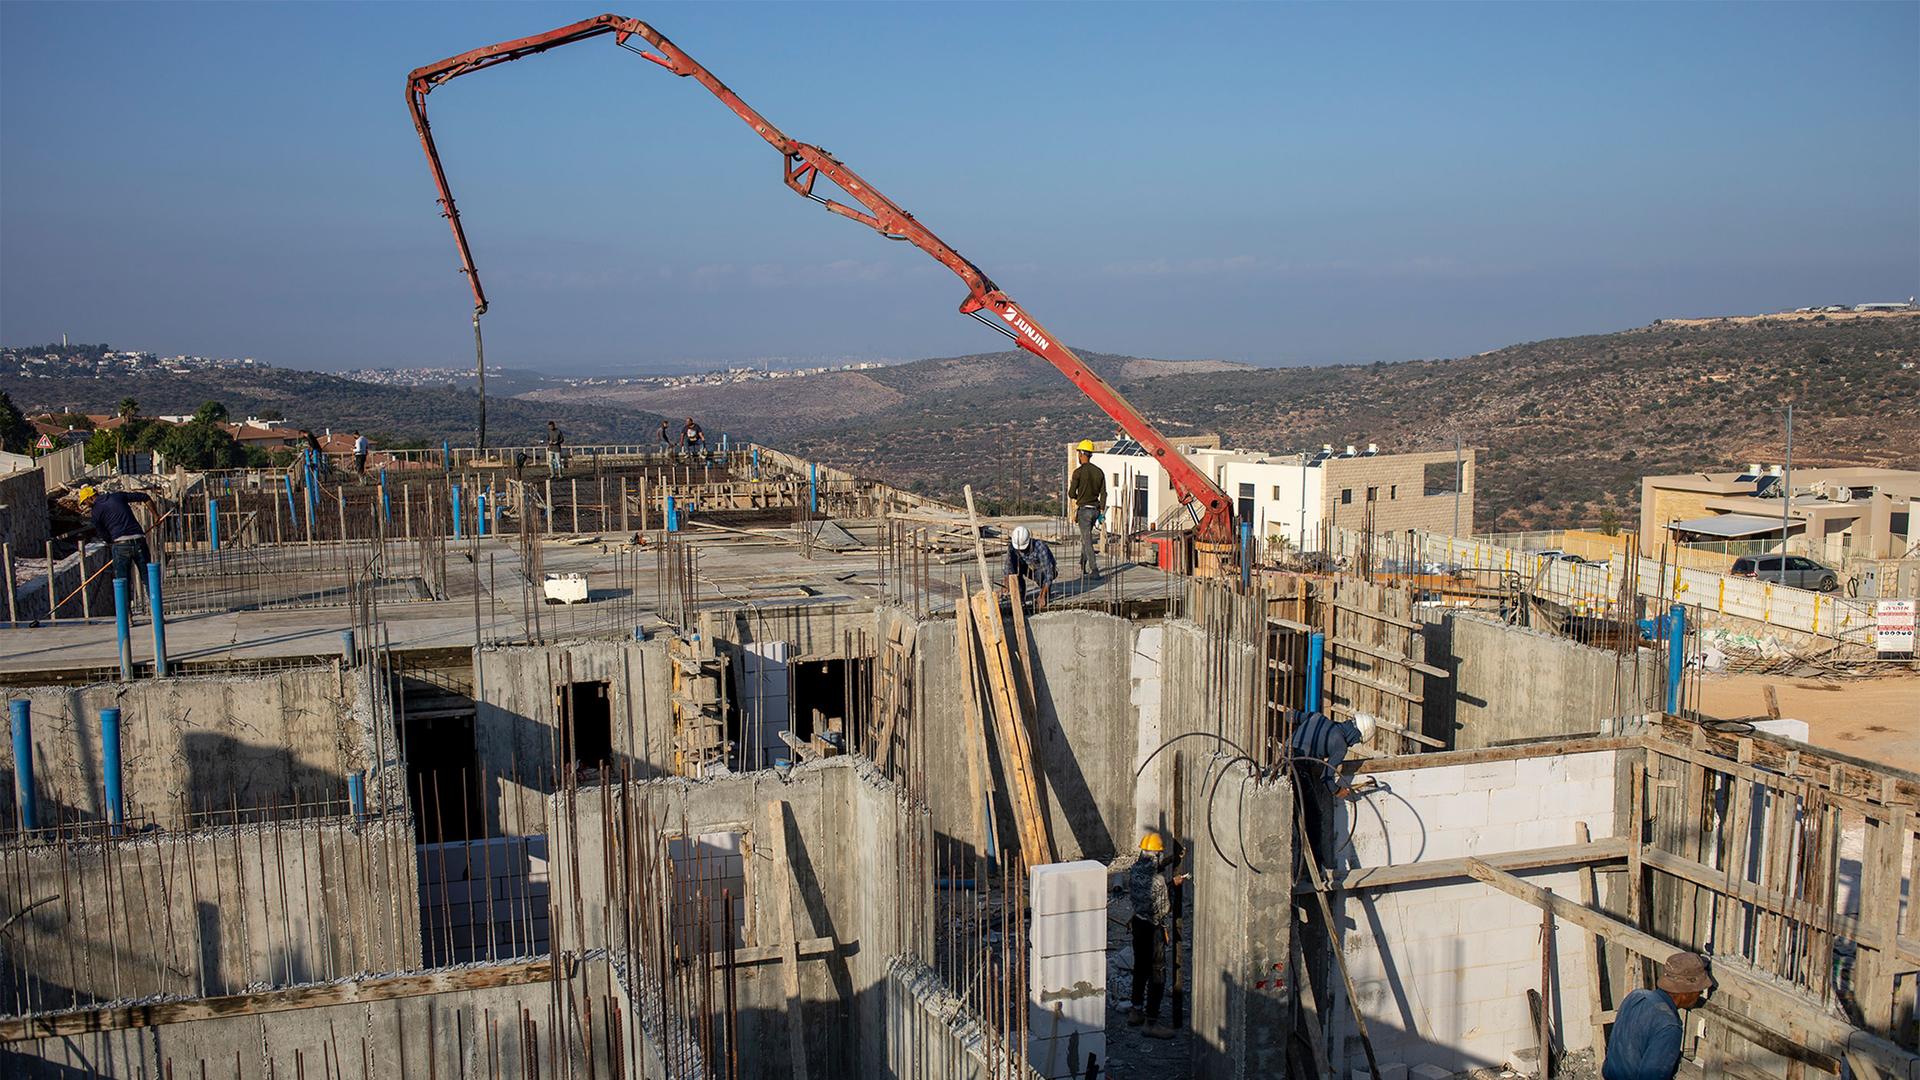 Palestinian laborers work building new houses in the West Bank Jewish settlement of Bruchin near the Palestinian town of Nablus